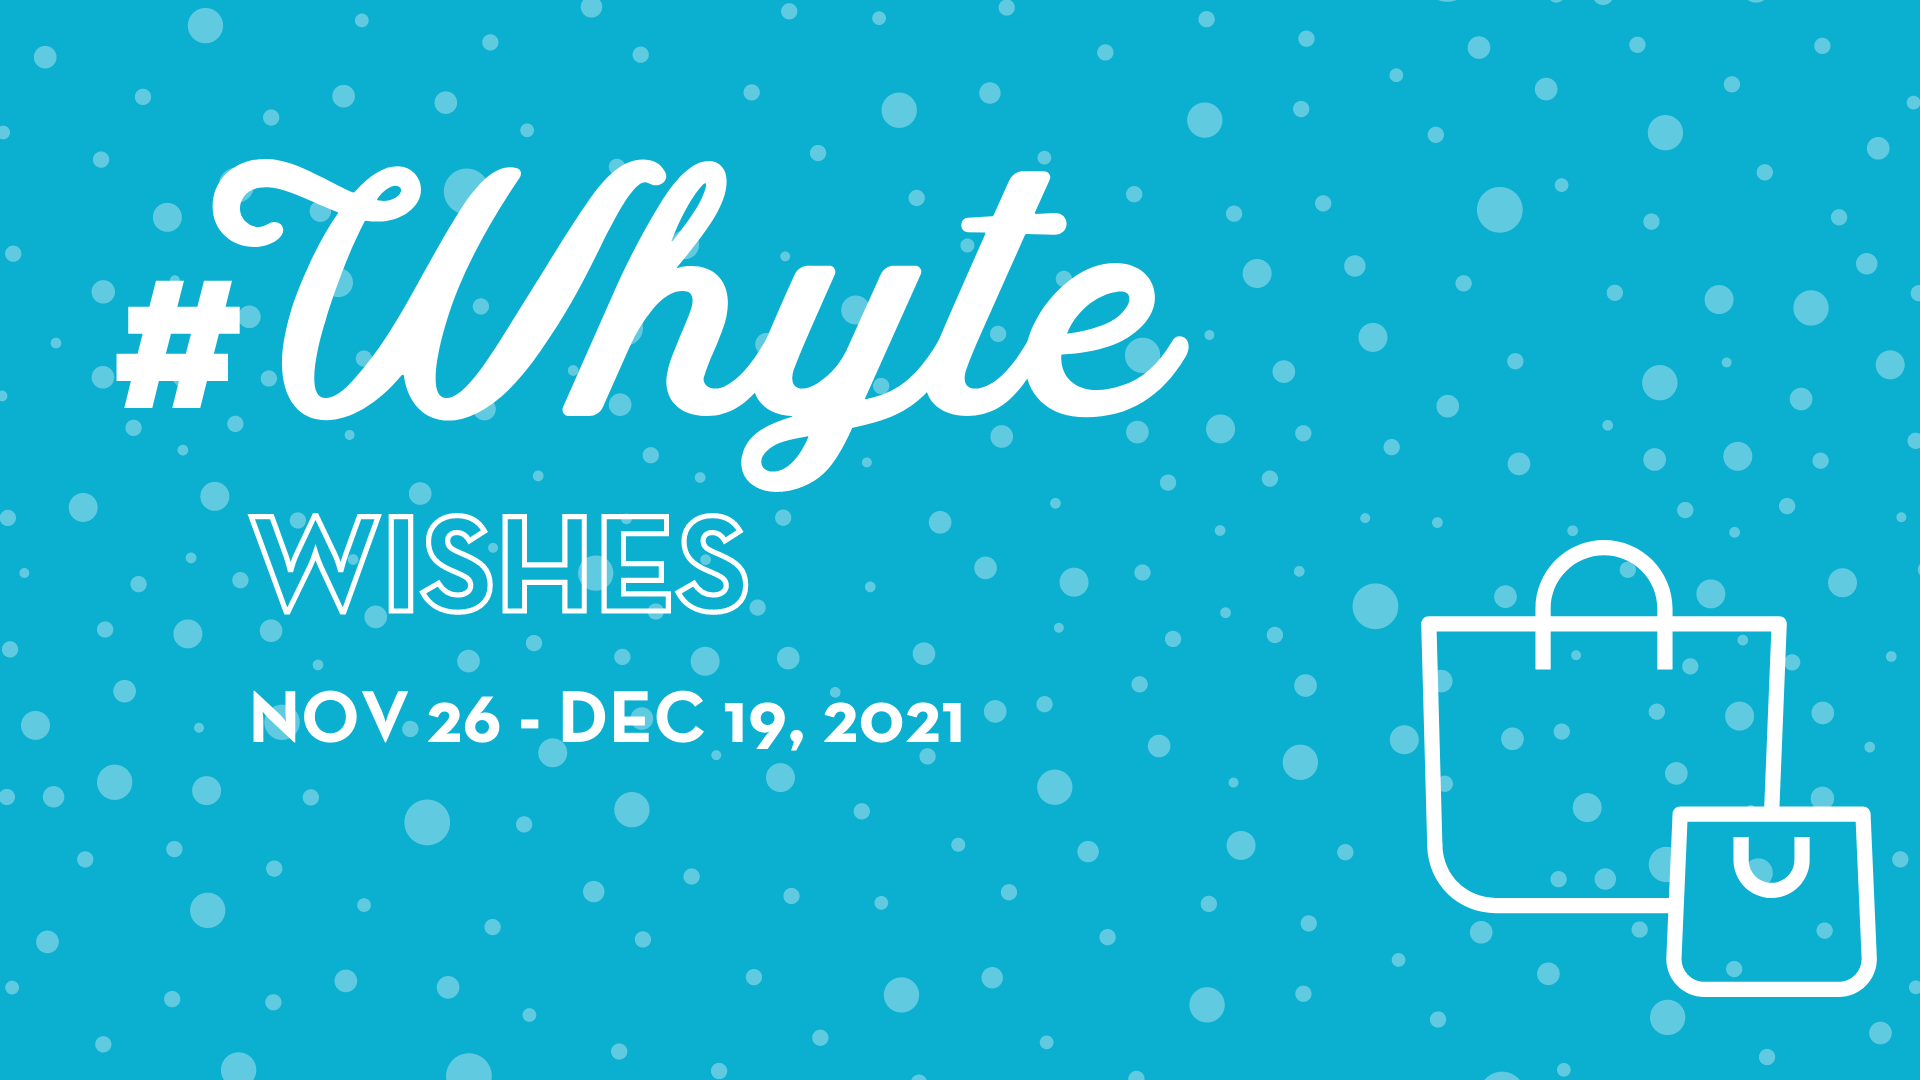 White text on blue background reads Whyte Wishes November 26 to December 19 2021, gift bags sit in the corner